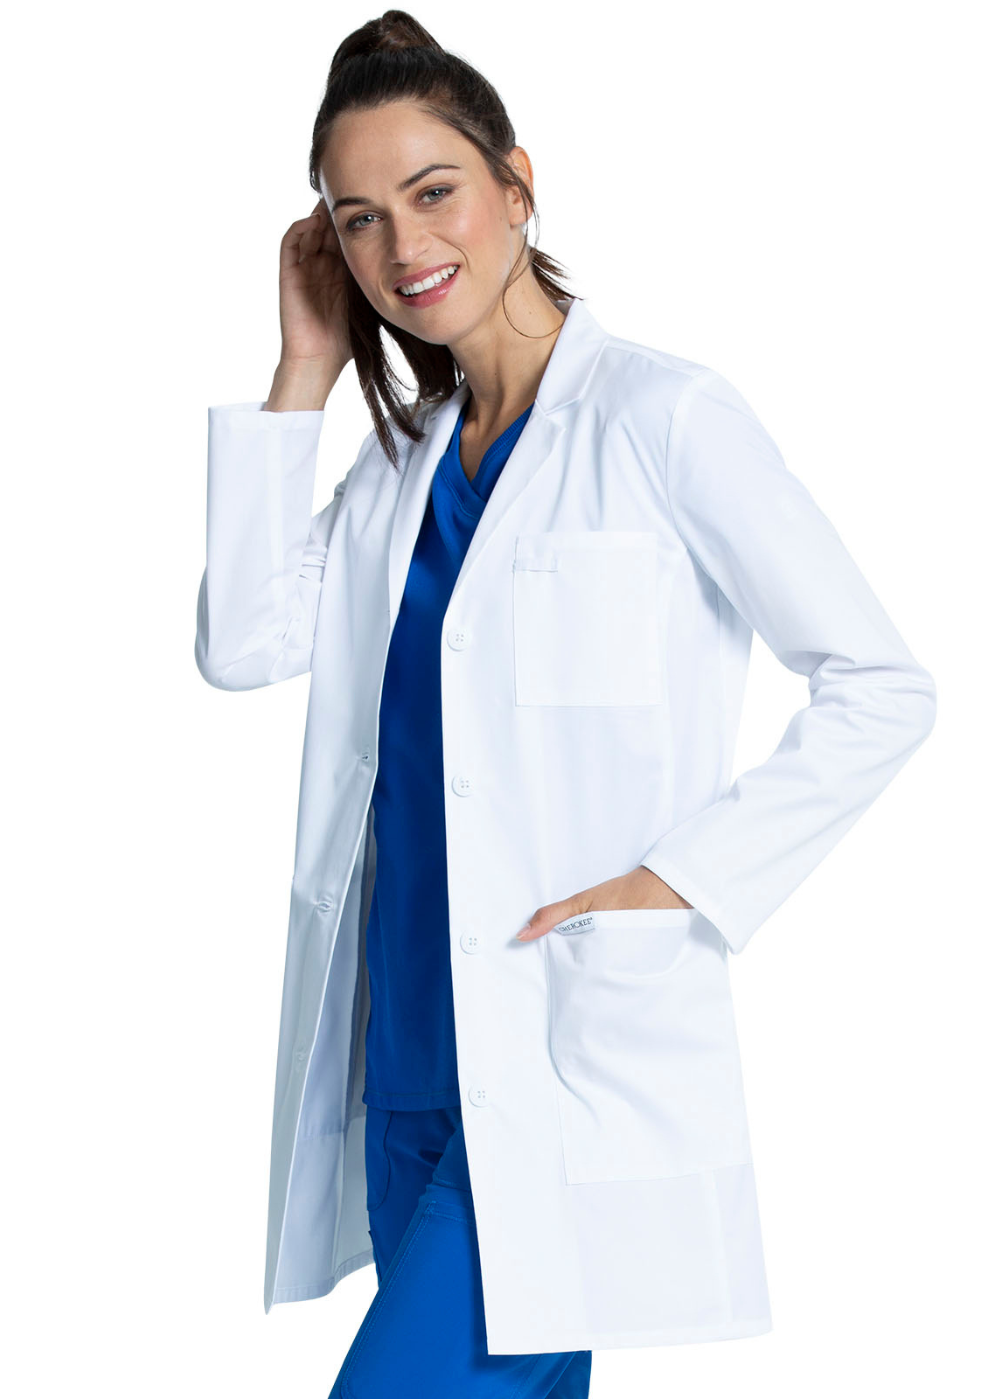 PROJECT LAB BY CHEROKEE 33" Lab Coat STYLE CK452